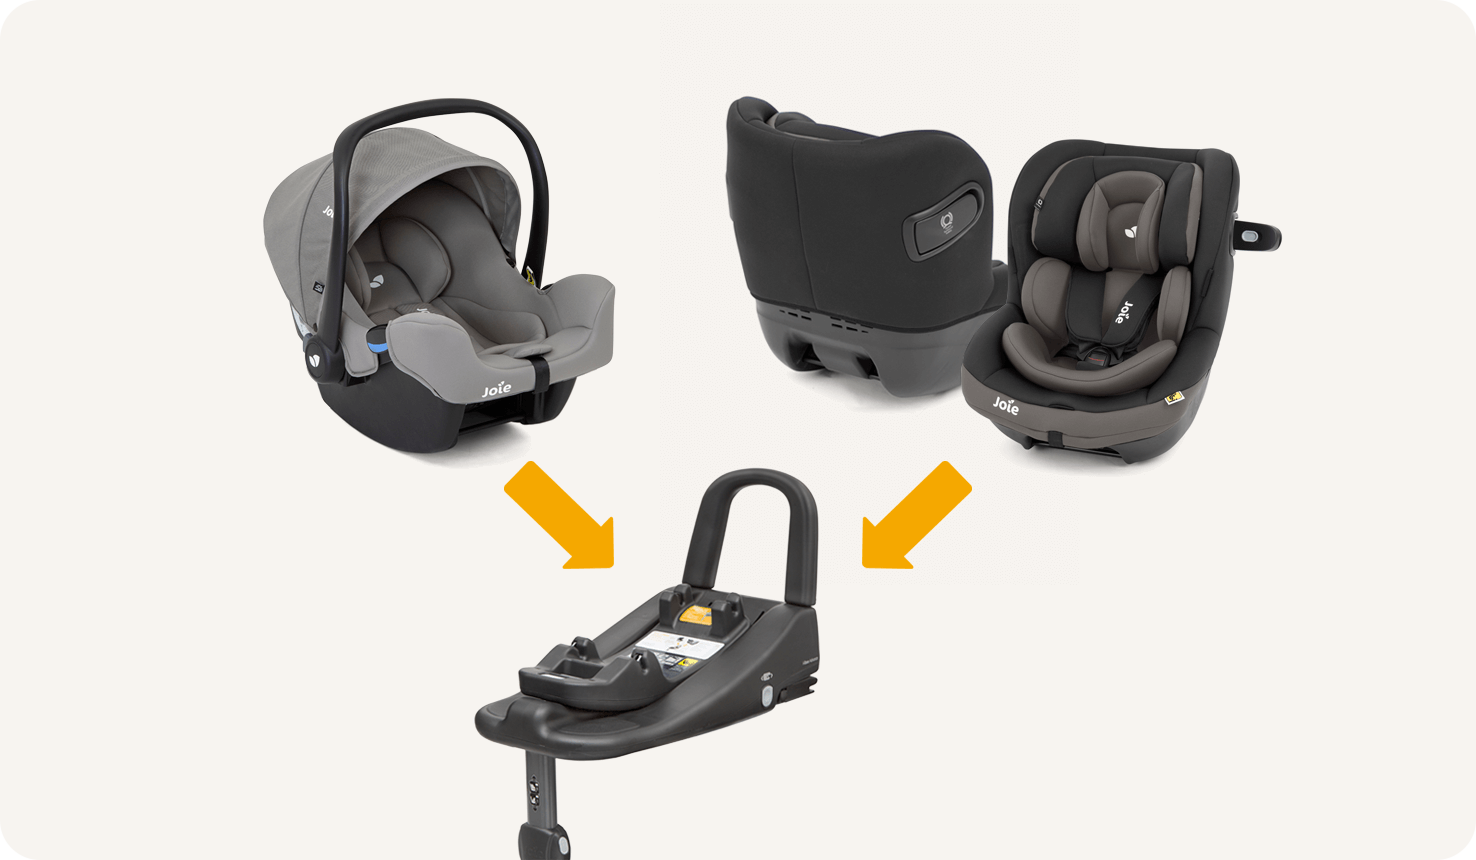 Joie i-Snug infant seat sits above and to the left of a car seat base, and the Joie i-Venture toddler seat sits above and to the right of the base. Both car seats have arrows pointing down at the base.